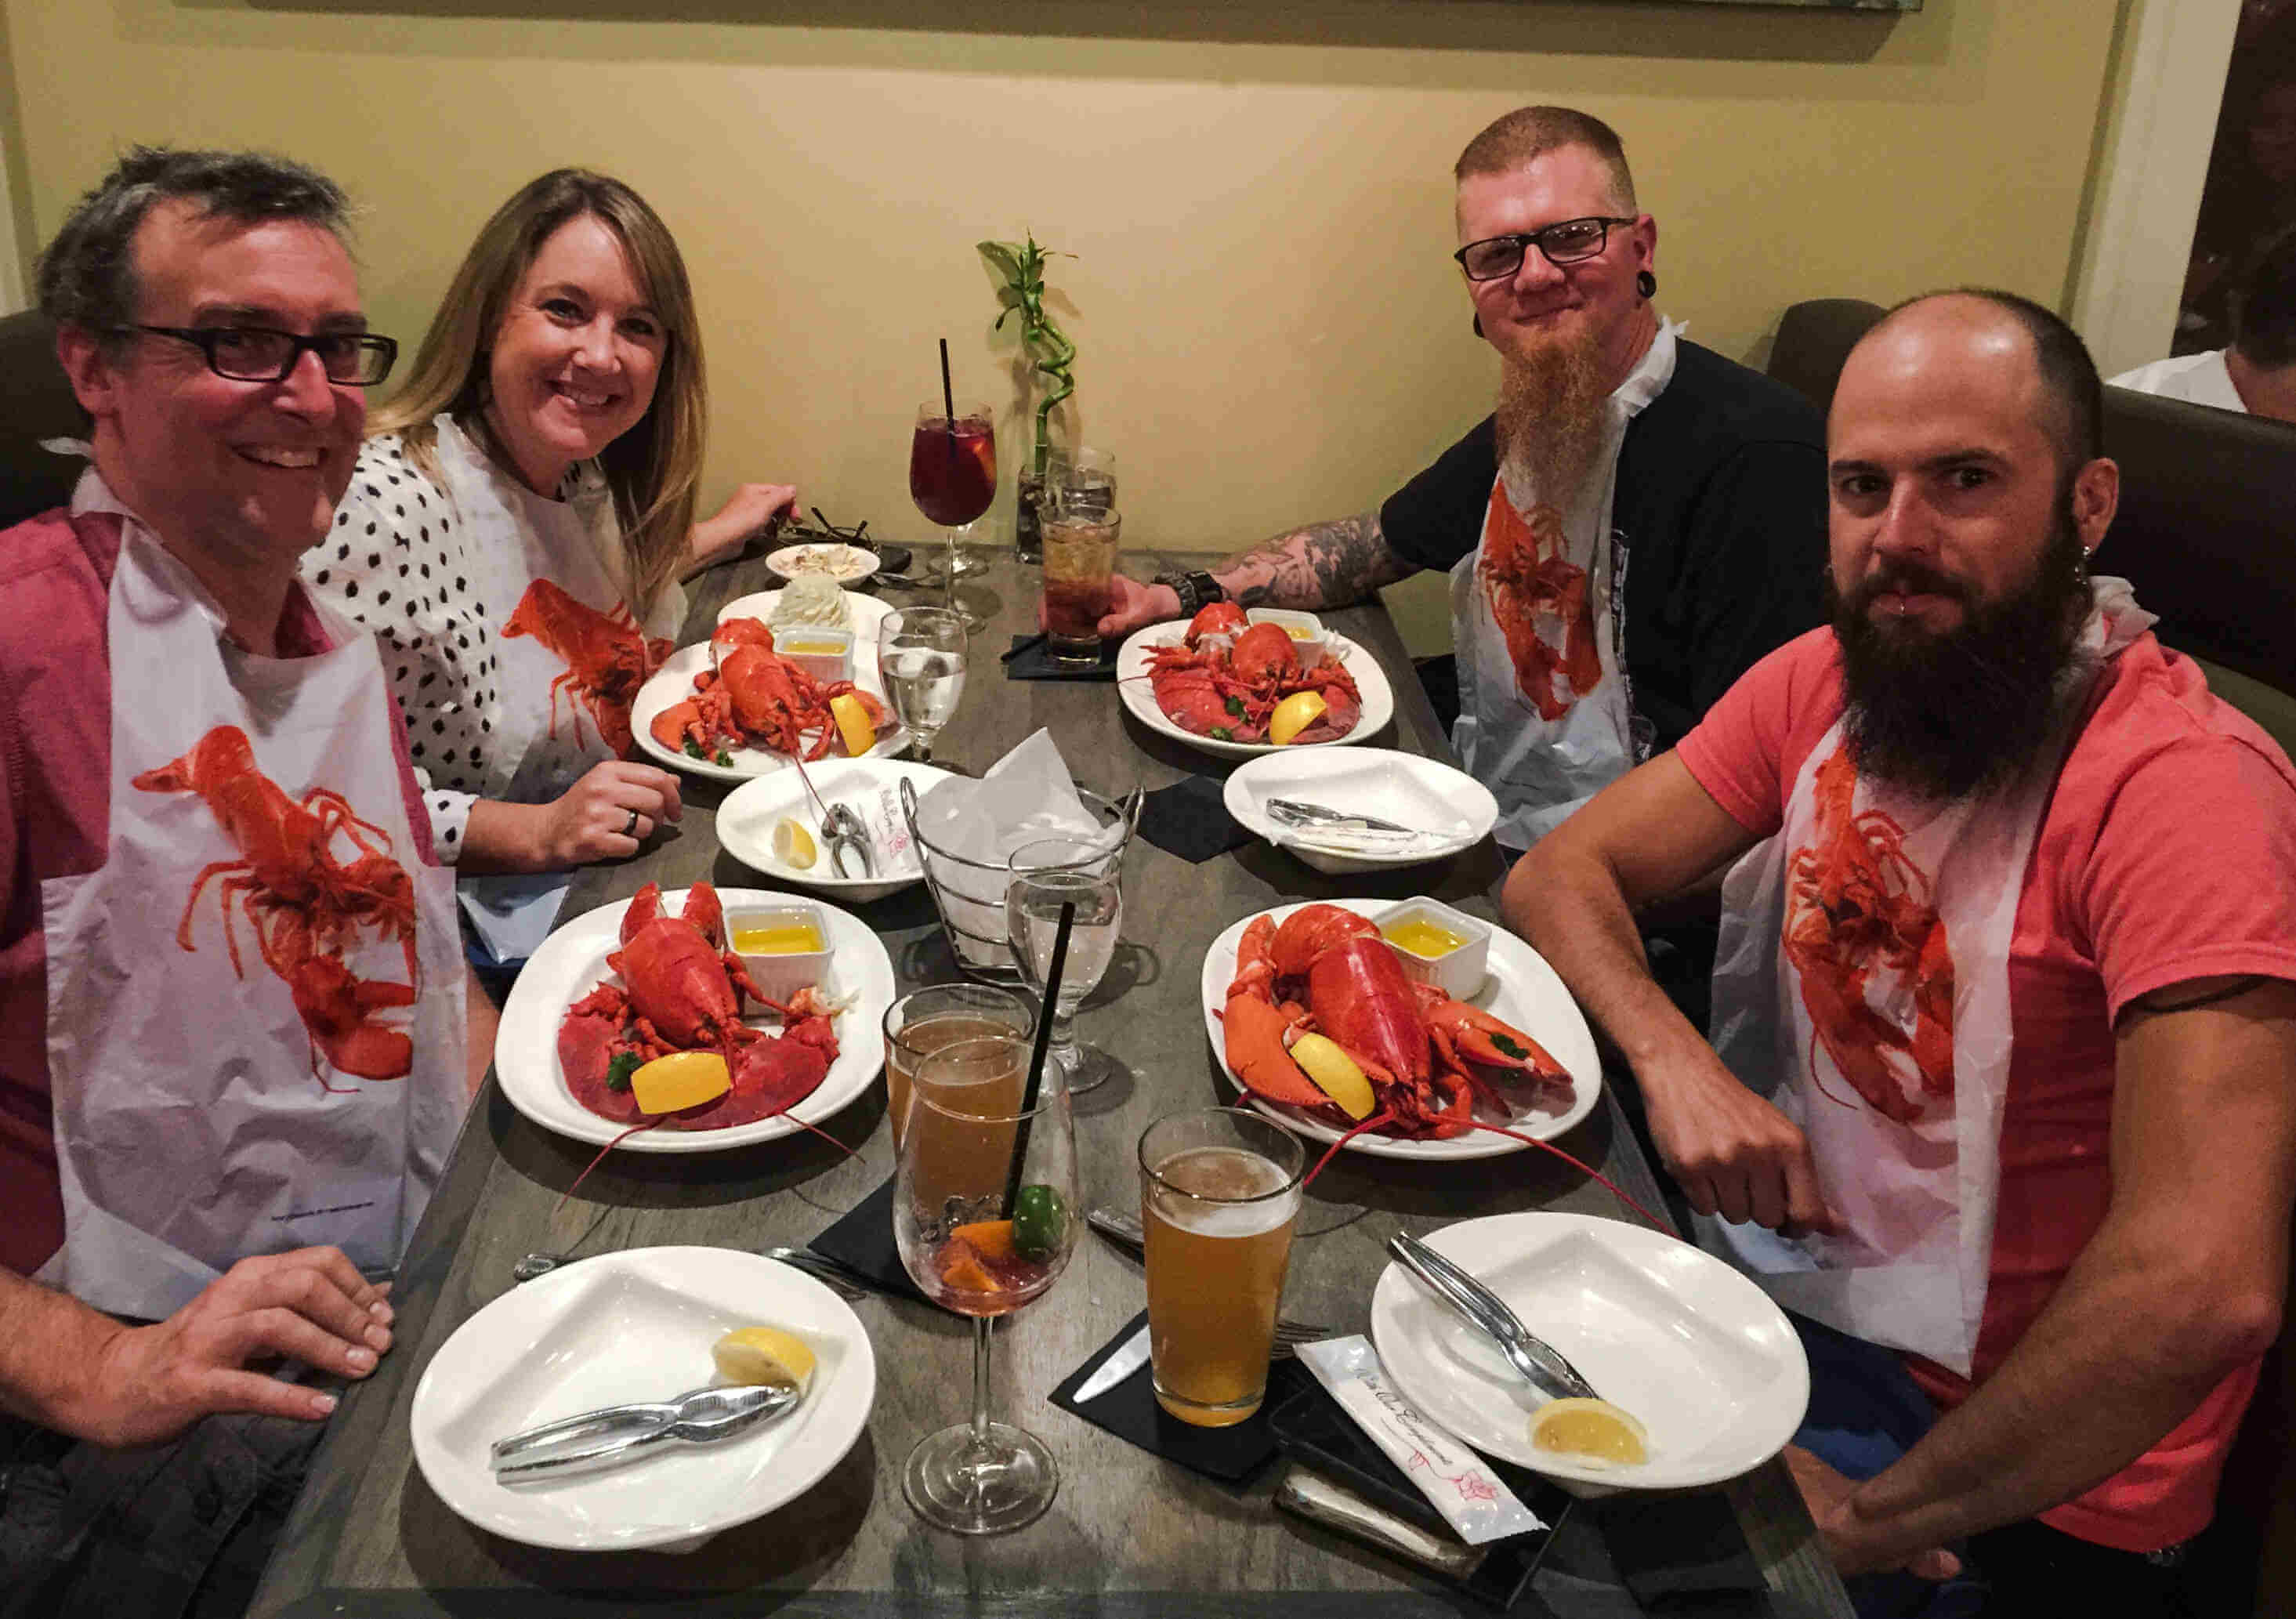 Four people sitting at a table, posing with plates of lobsters in front of them